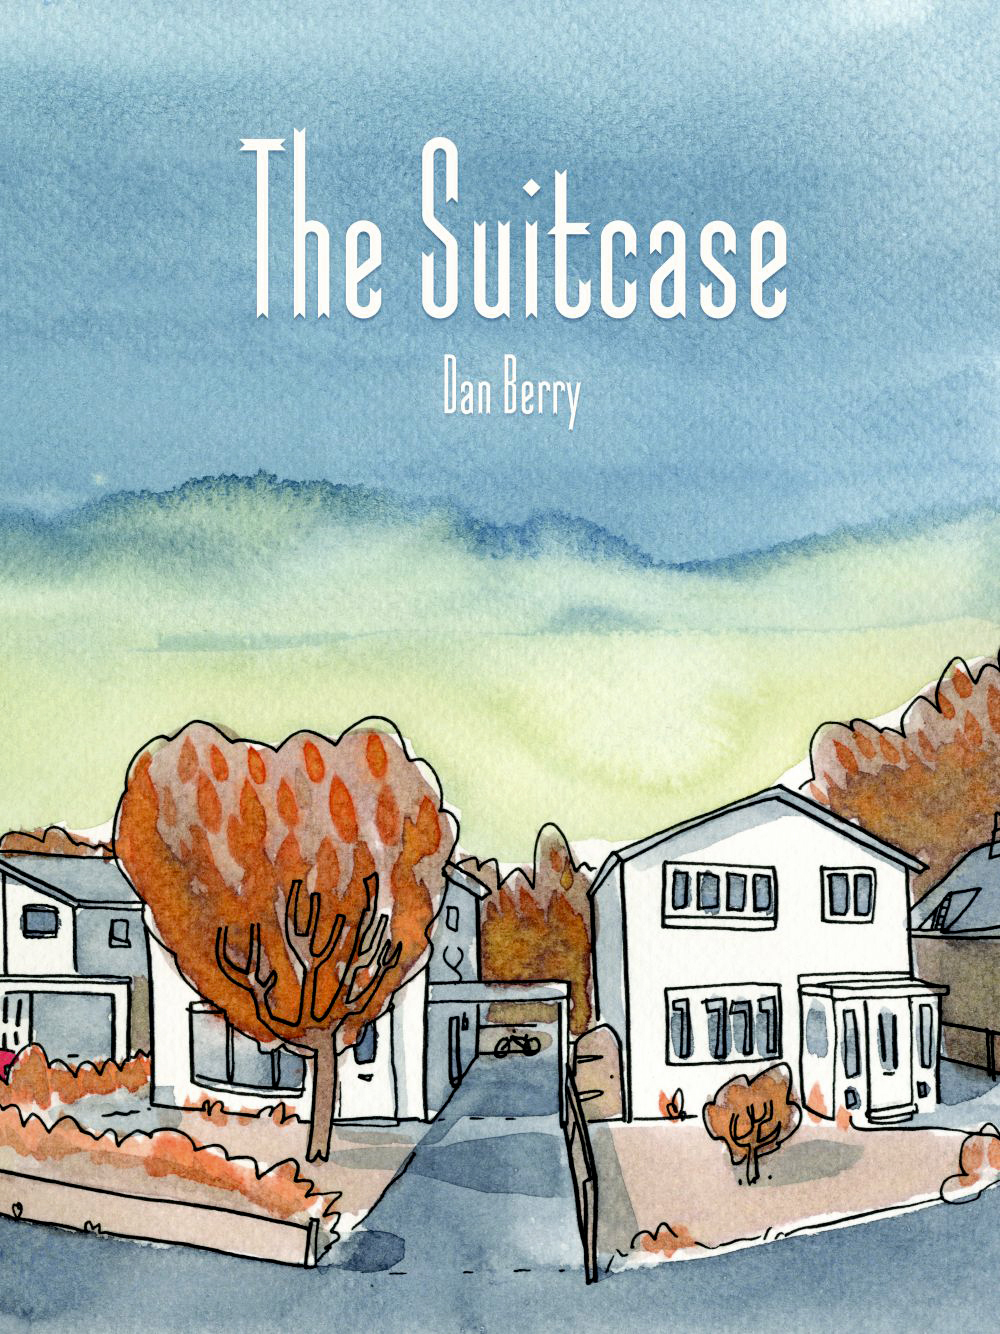 The Suitcase, 2012